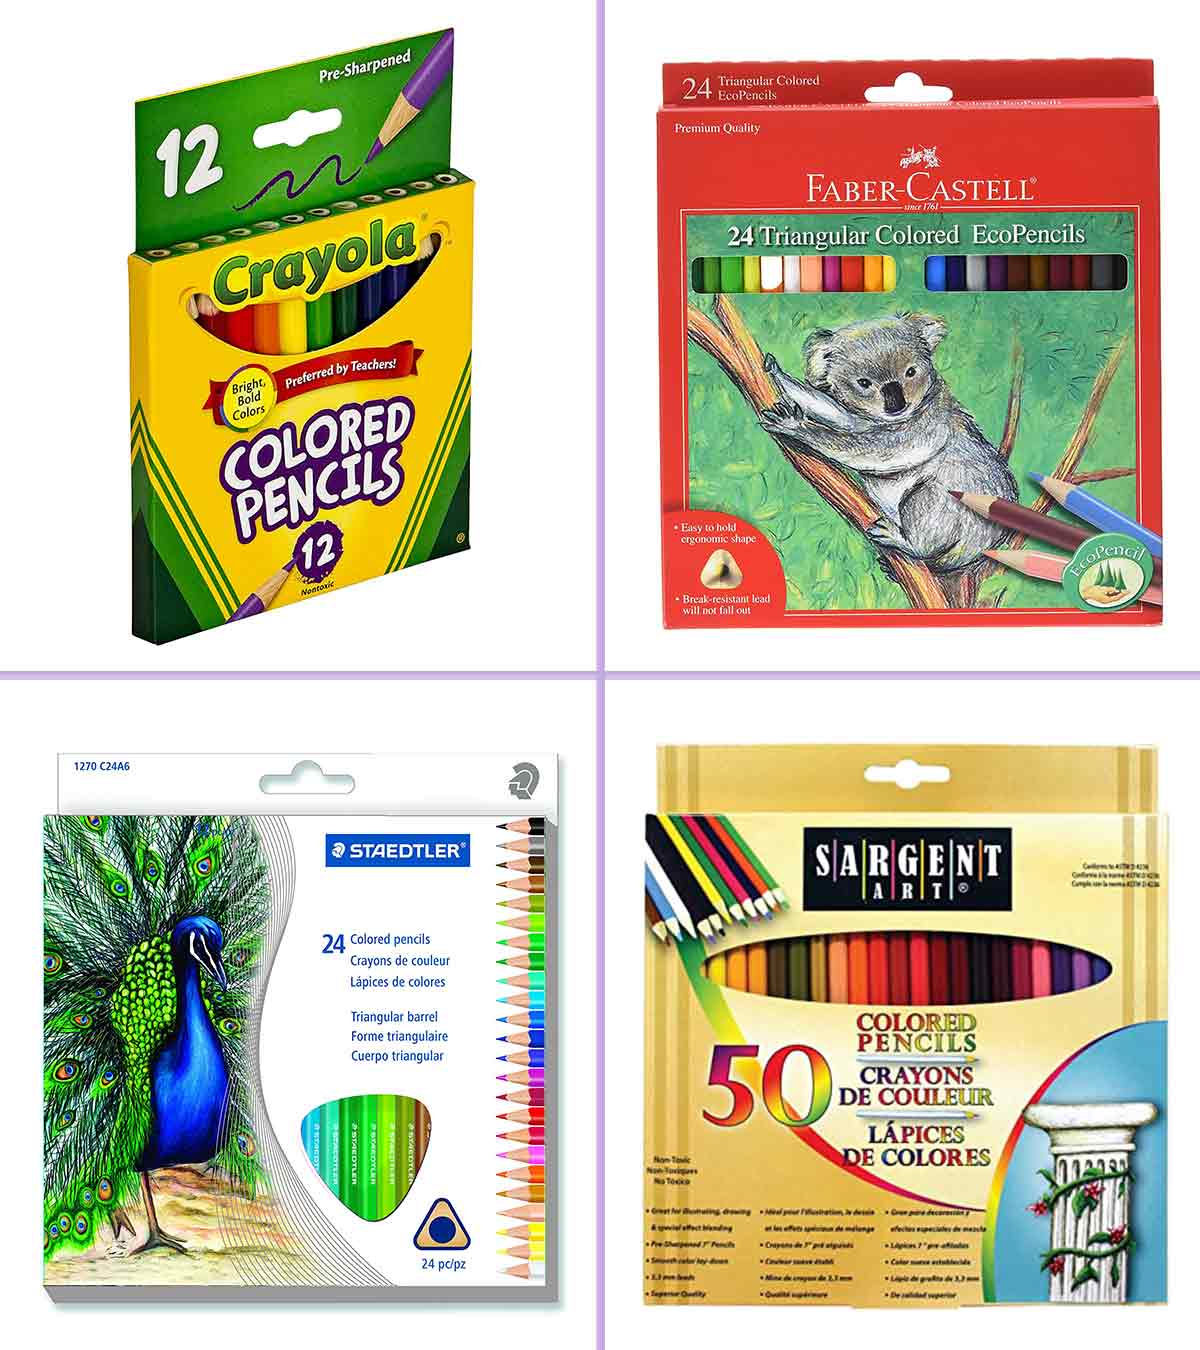 7 Cool Colored Pencil Techniques to Teach Your Students - The Art of  Education University